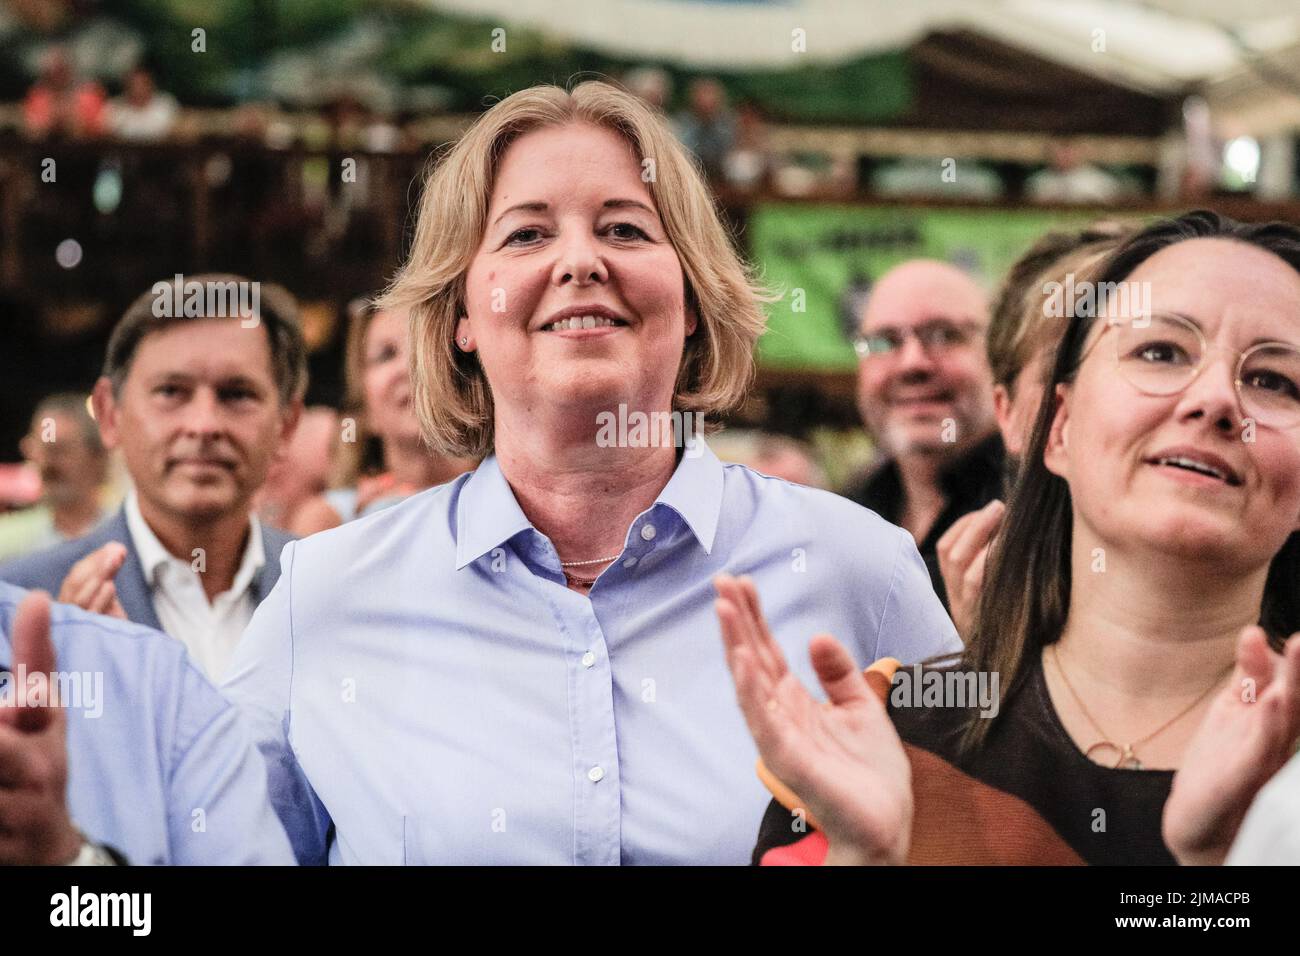 Crange, Herne, NRW, 05th Aug July, 2022. President of the German Parliament (Bundestagspräsidentin), Bärbel Bas (SPD), has fun in the tent and joins in the opening ceremony. The official opening ceremony of the 2022 Cranger Kirmes, Germany's 3rd largest funfair and the largest of its kind in NRW, is attended by invited guests in the festival tent and beer hall. The popular fair, which was paused during the pandemic, regularly attracts more than 4m visitors during its 10 day run and has been established for decades. Credit: Imageplotter/Alamy Live News Stock Photo